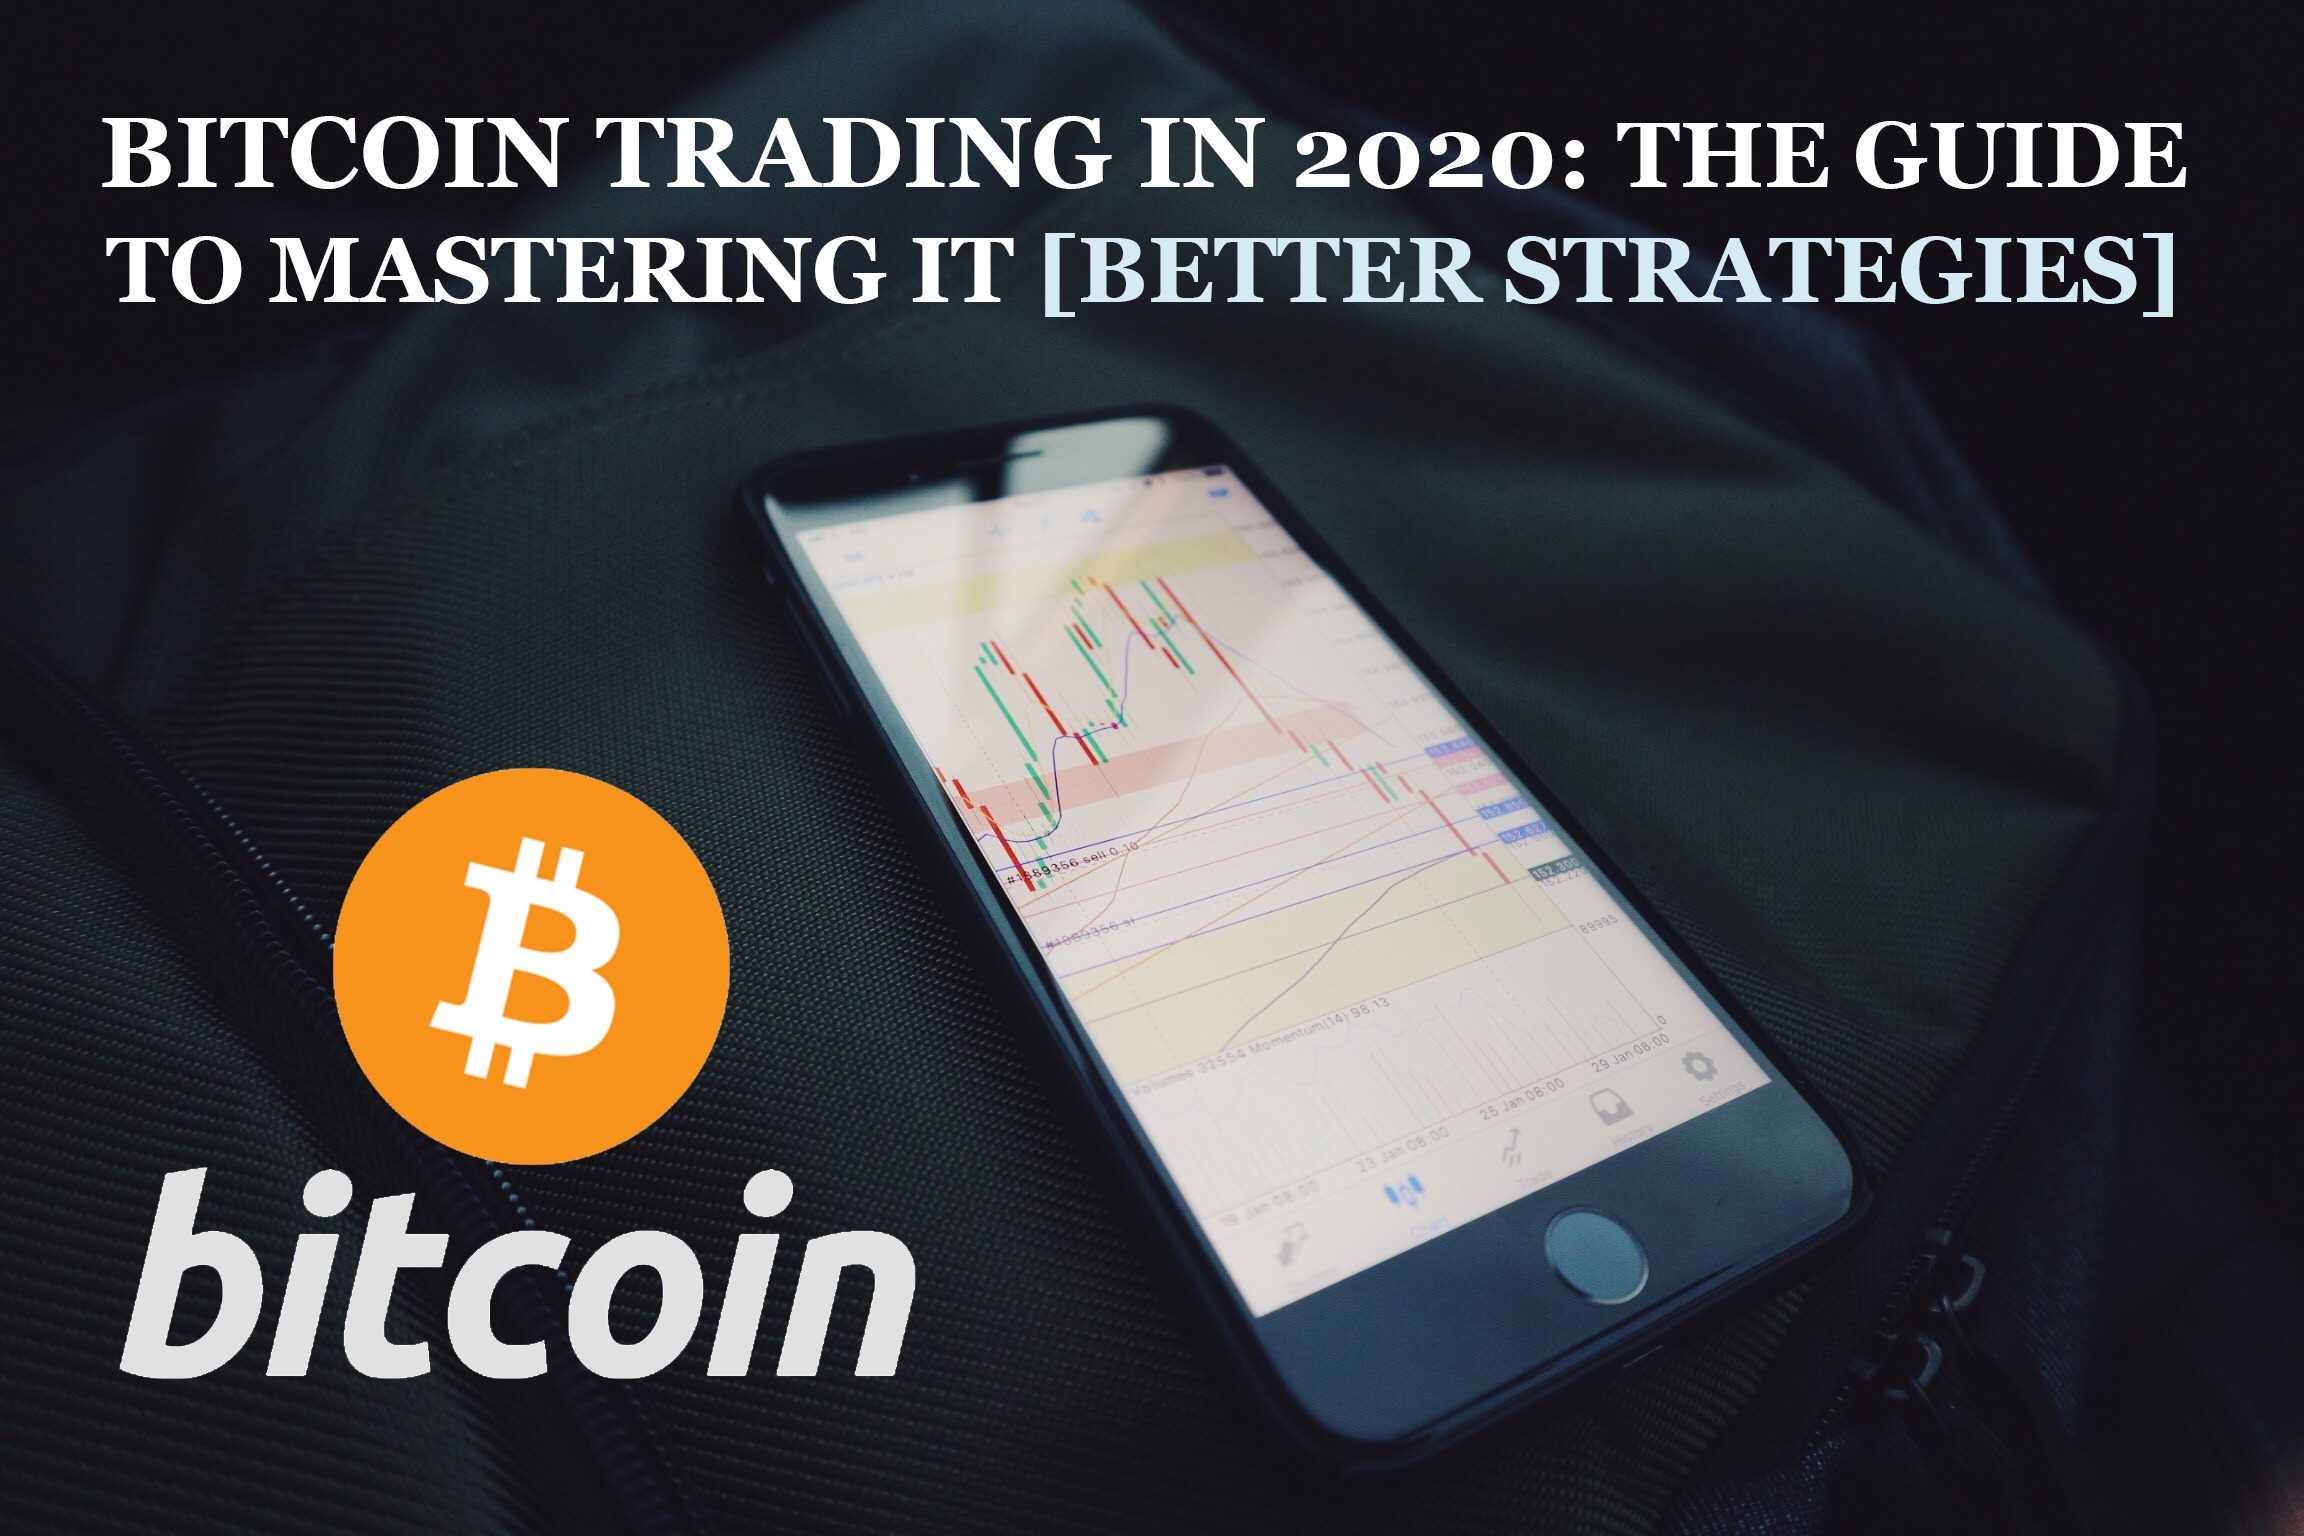 Best Bitcoin Trading Strategies That Will Continue to Grow in 2020